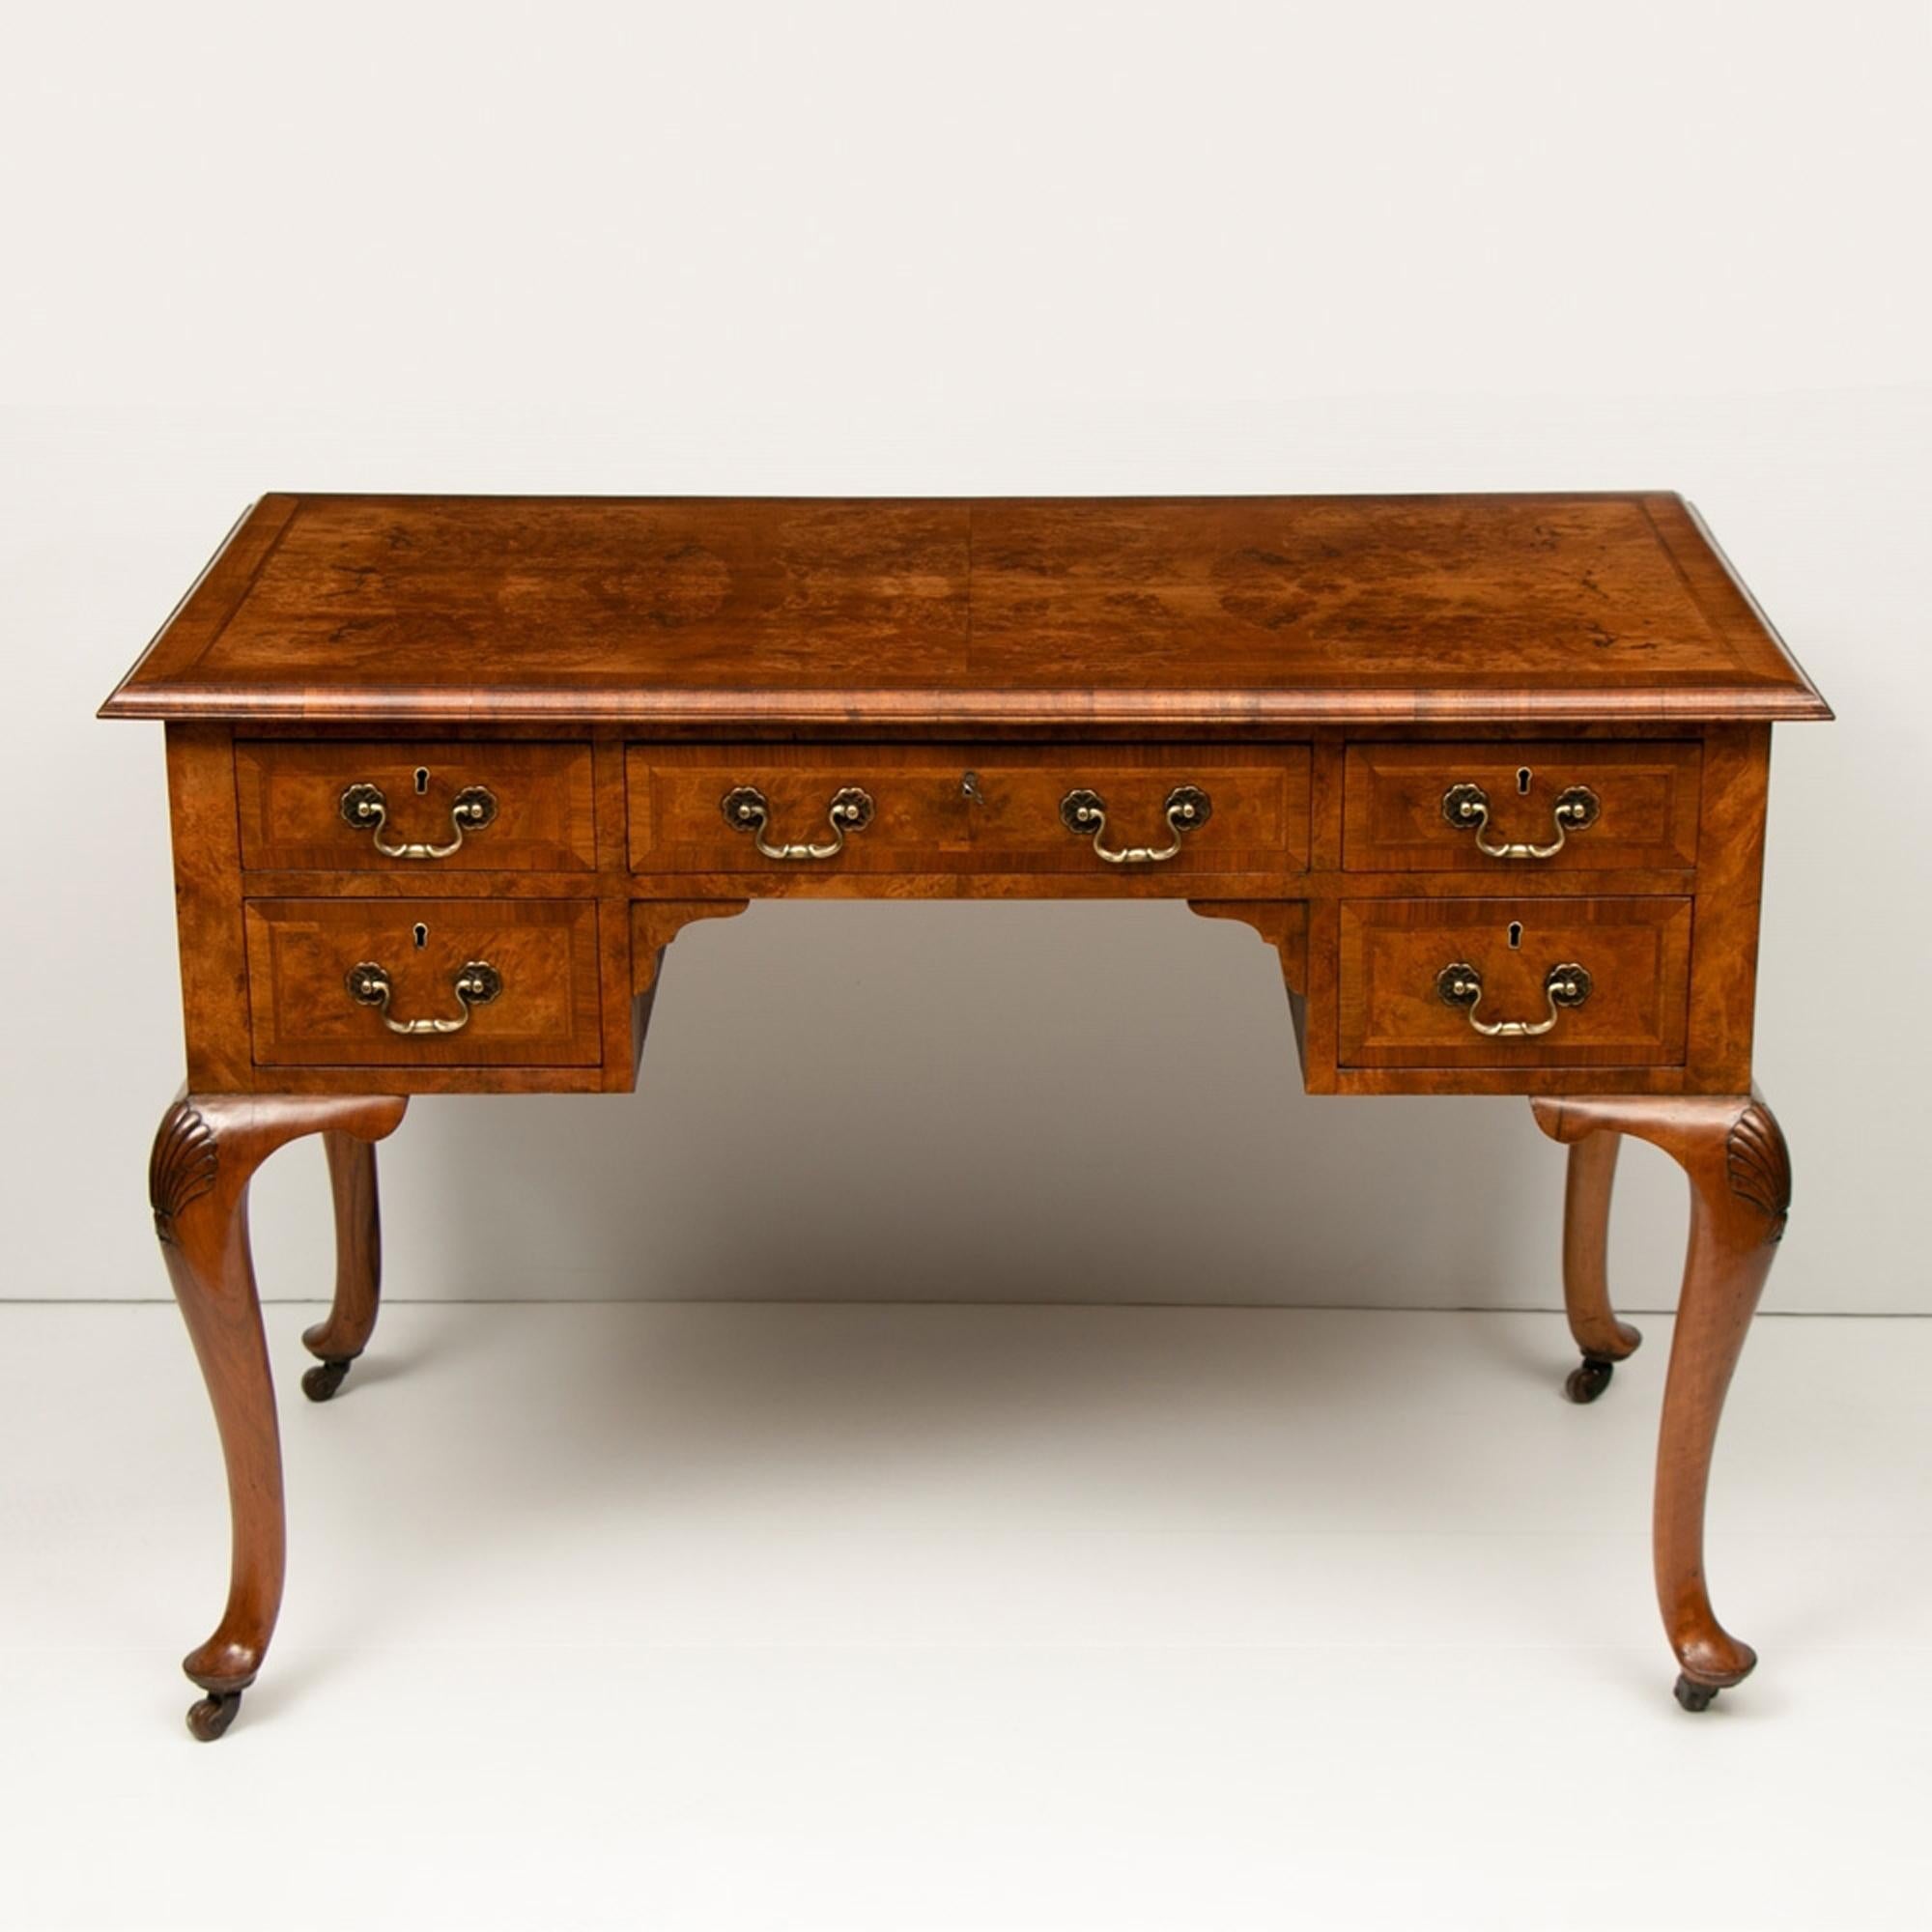 A very good quality circa 1900 walnut Quenne Ann style carved and quarter veneered walnut writing desk. We have completely restored the desk and Hand bespoke French polished the desk and made keys for the locks.

Home ready.